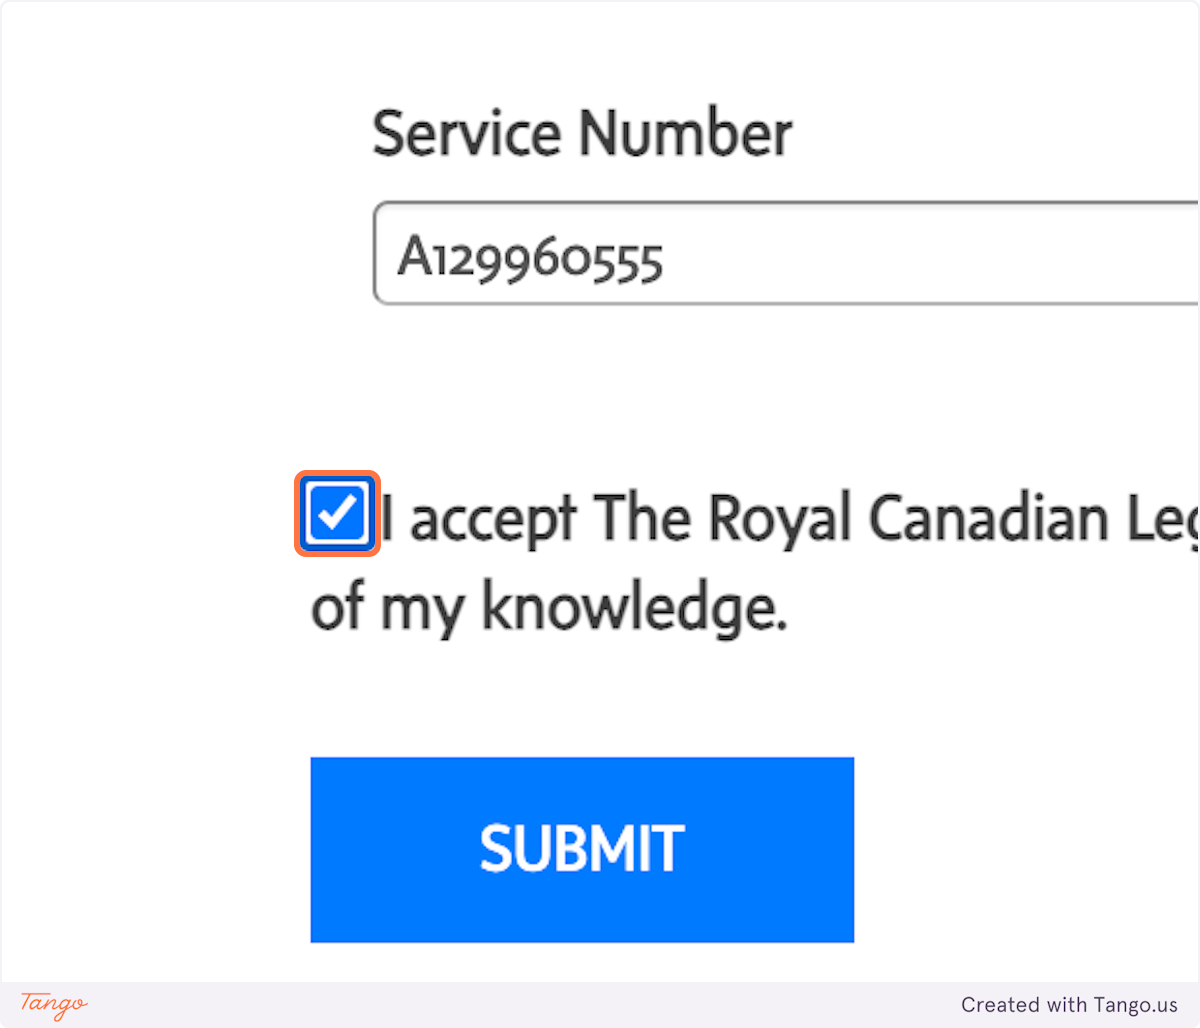 Check  I accept The Royal Canadian Legion's Policies and I certify all information above is true and correct to the best of my knowledge.